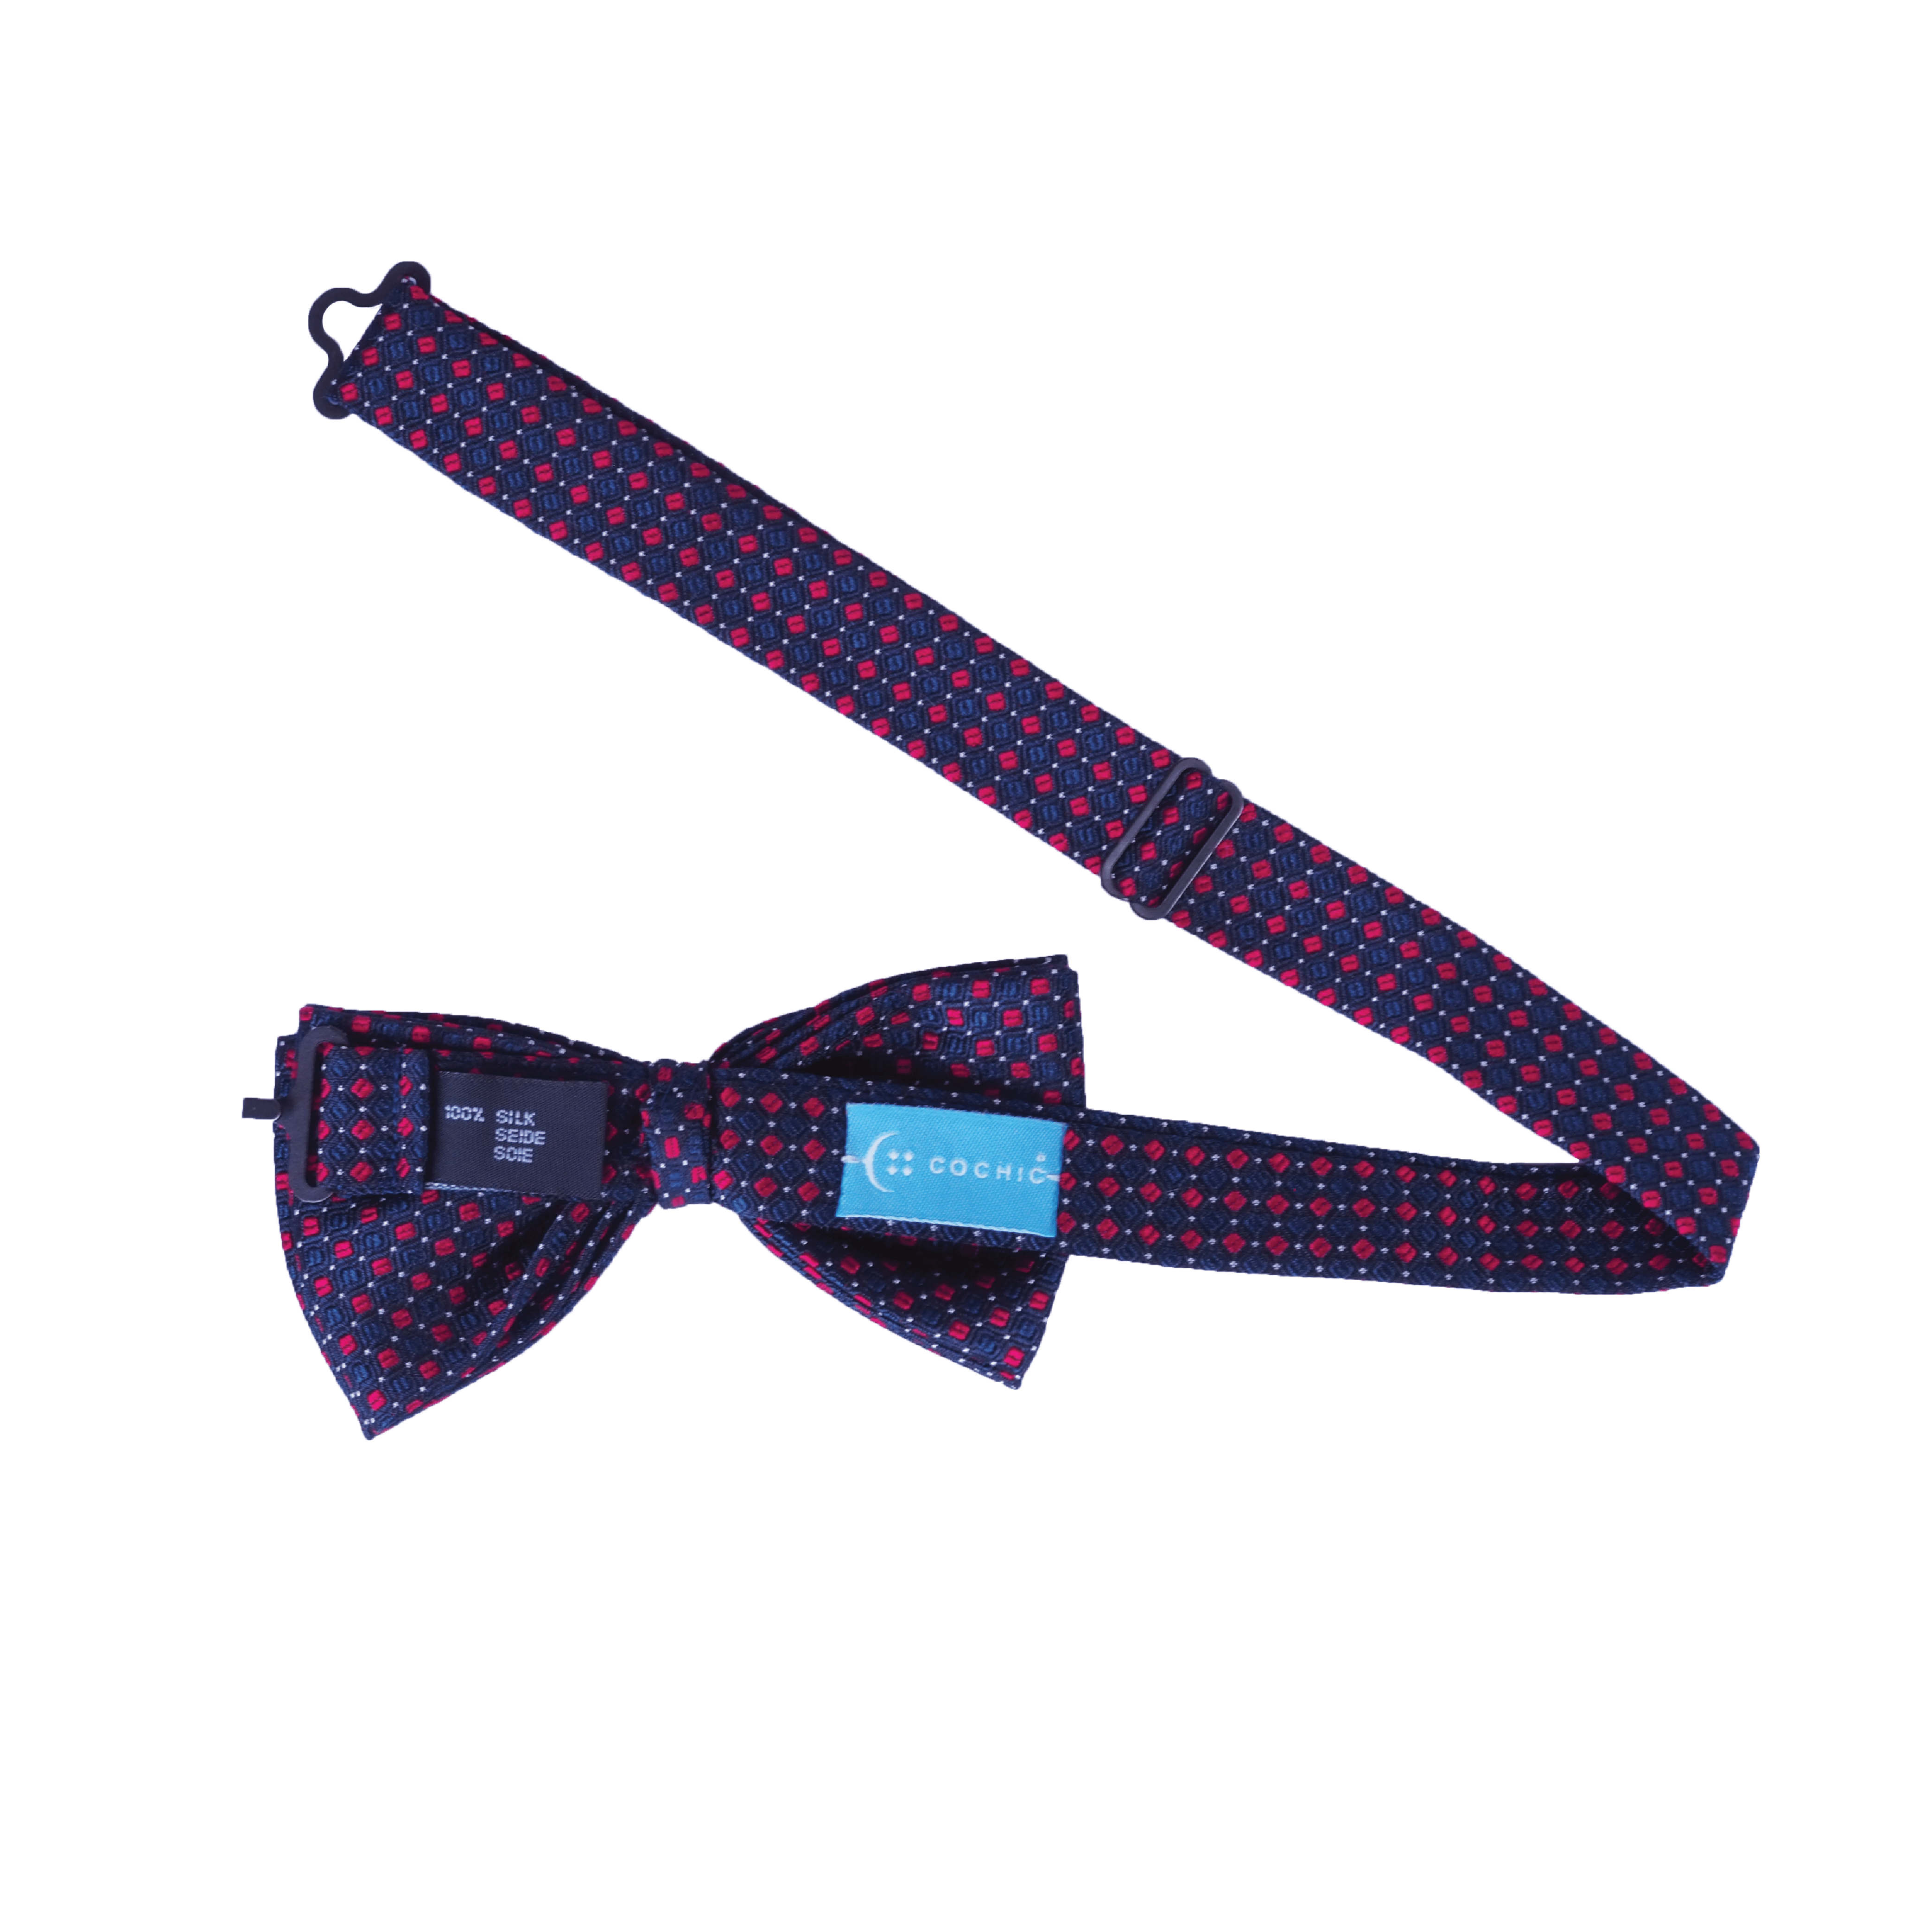 Scarlet Checkmate Bow Tie (100% Silk)